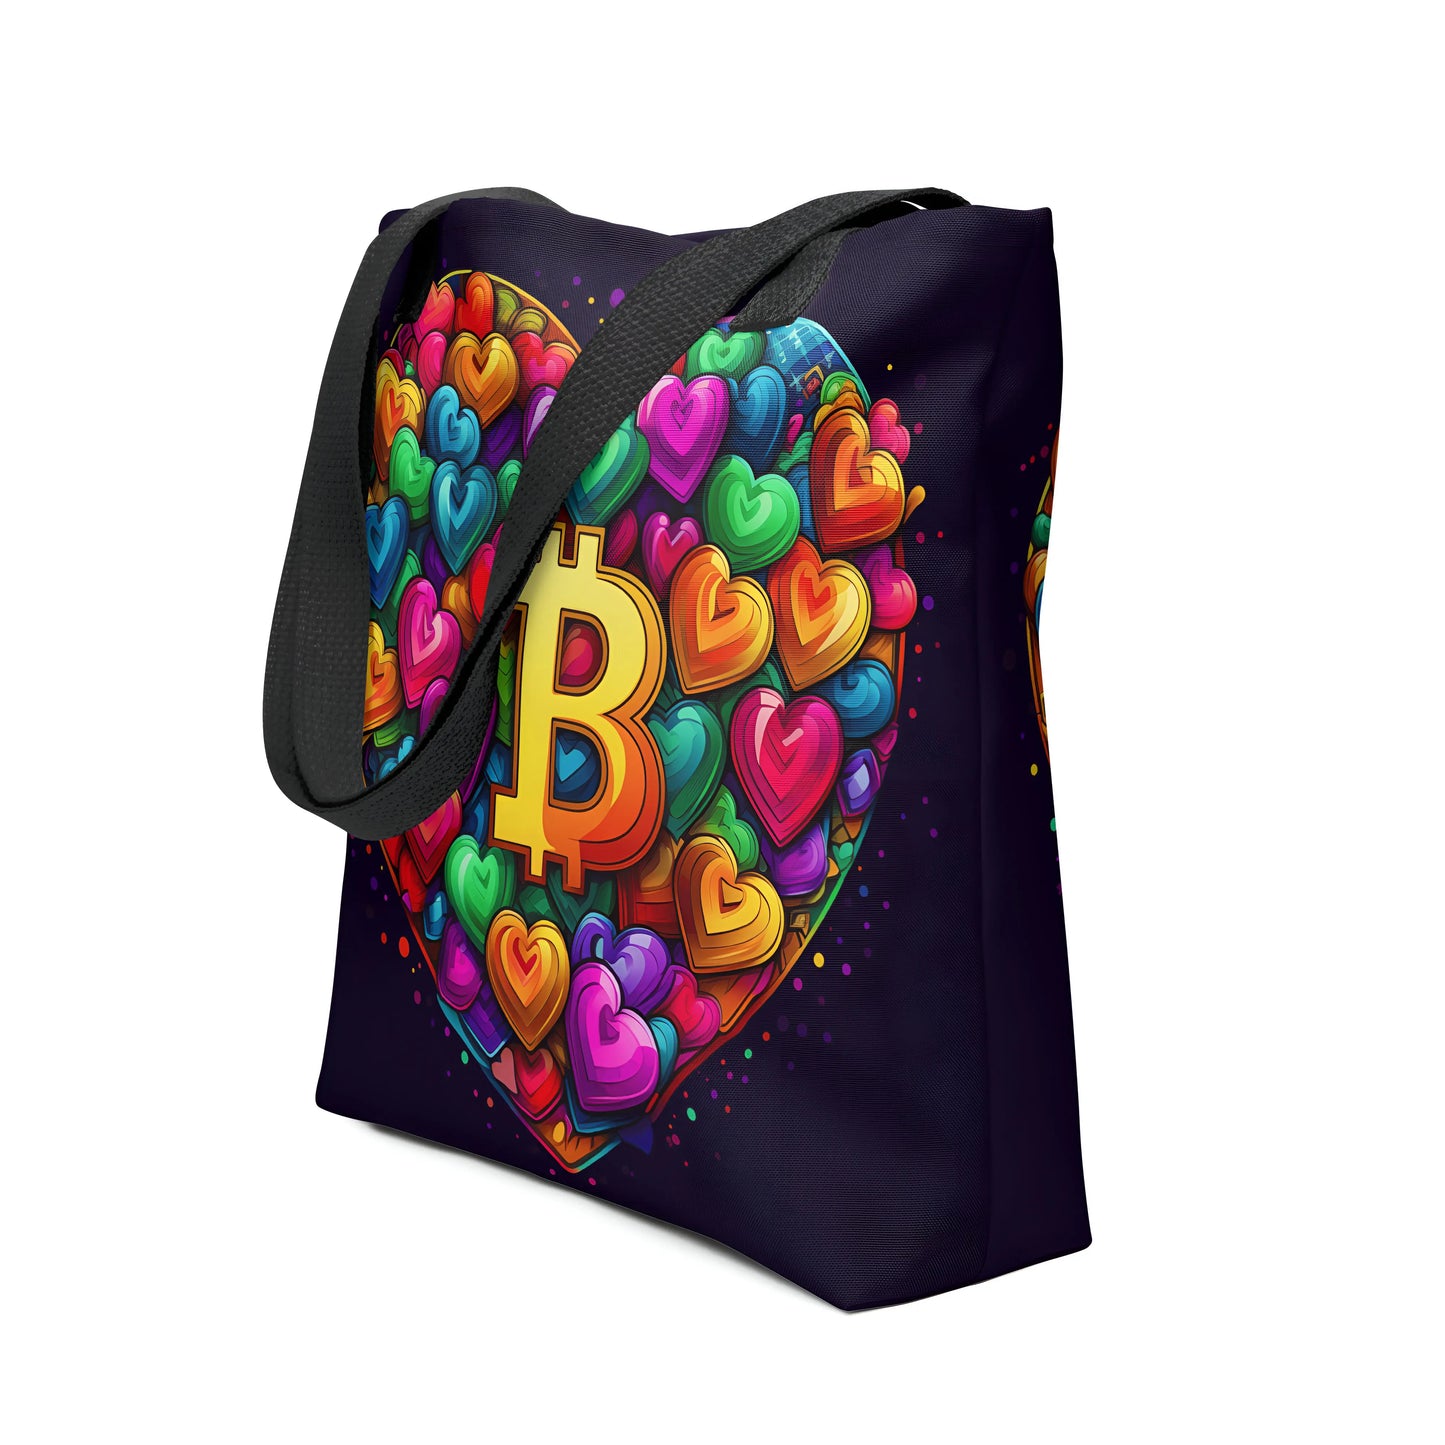 Bitcoin is Love Tote bag